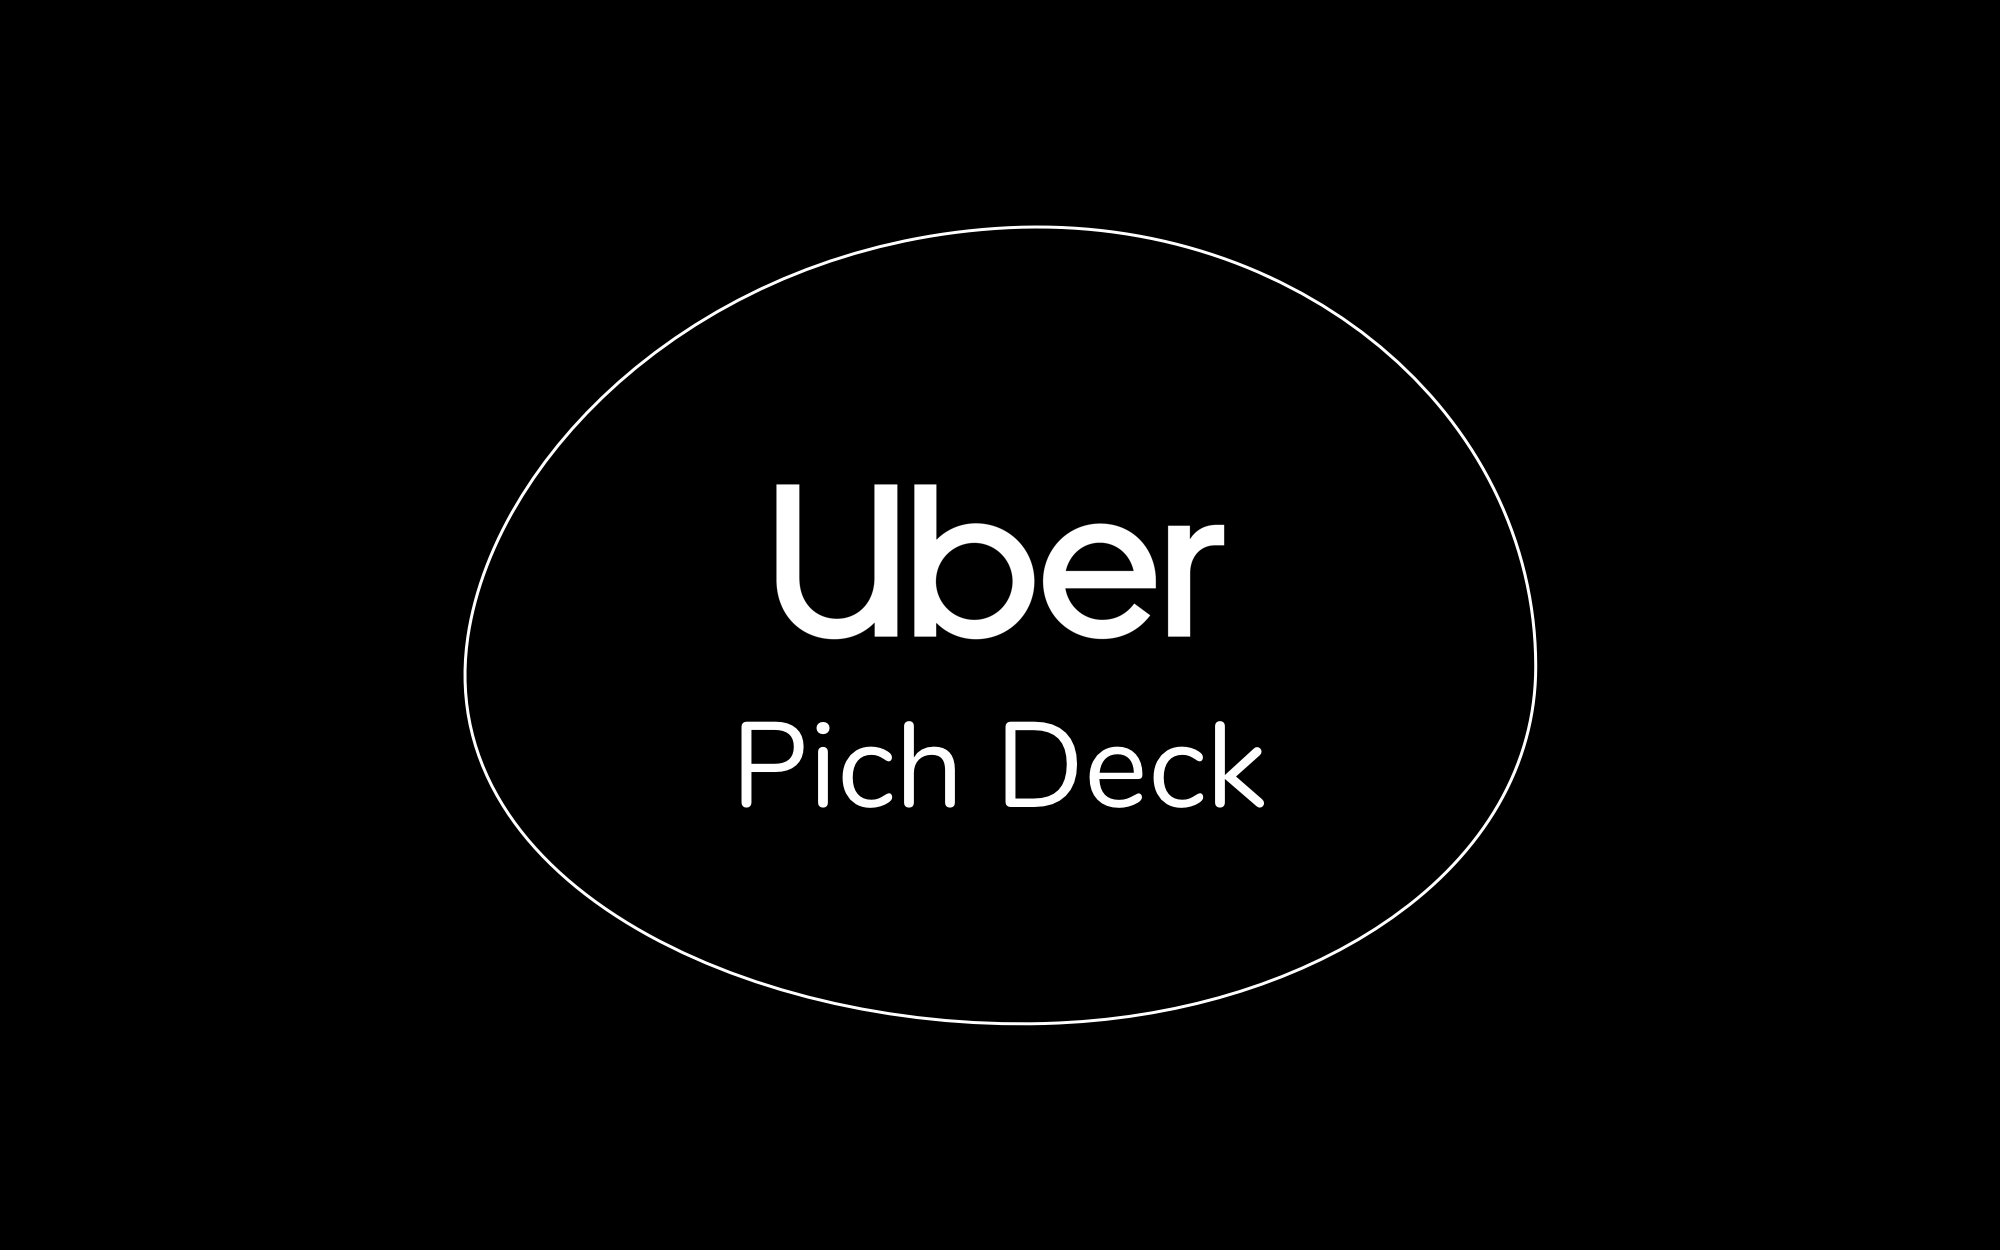 New Printable Uber Airport Logo - Uber Pitch Deck Template (PDF and PPT Download)